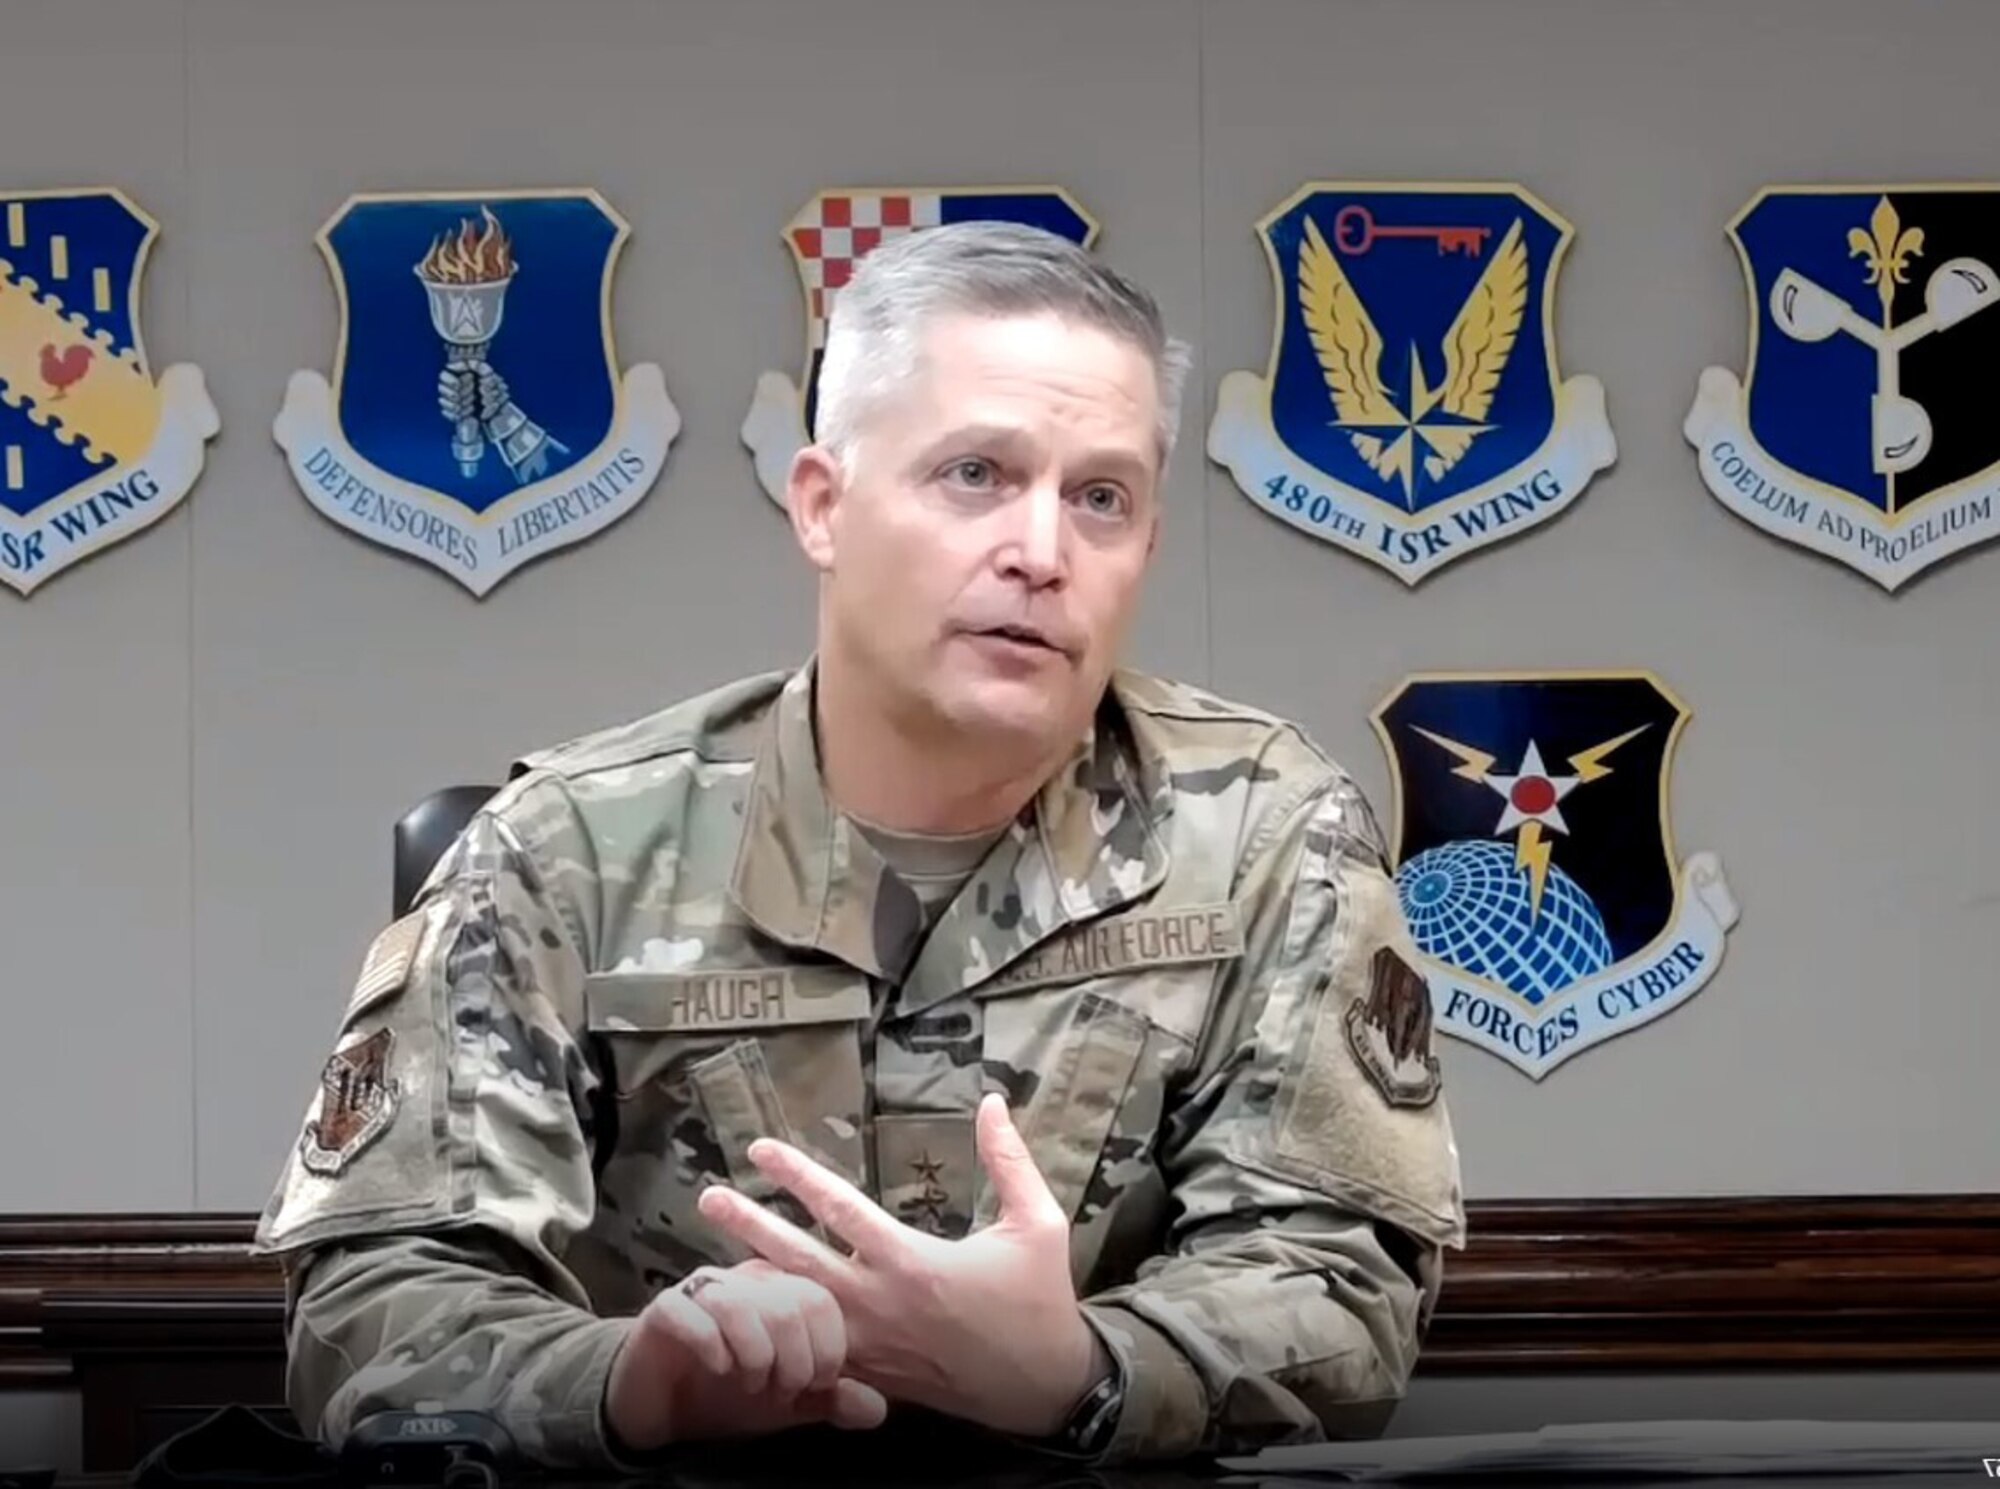 Lt. Gen. Timothy Haugh, Sixteenth Air Force (Air Forces Cyber) commander, spoke to virtual attendees at Alamo ACE, an event sponsored by the Alamo Chapter of the Armed Forces Communications & Electronics Association, Nov. 18, 2020.